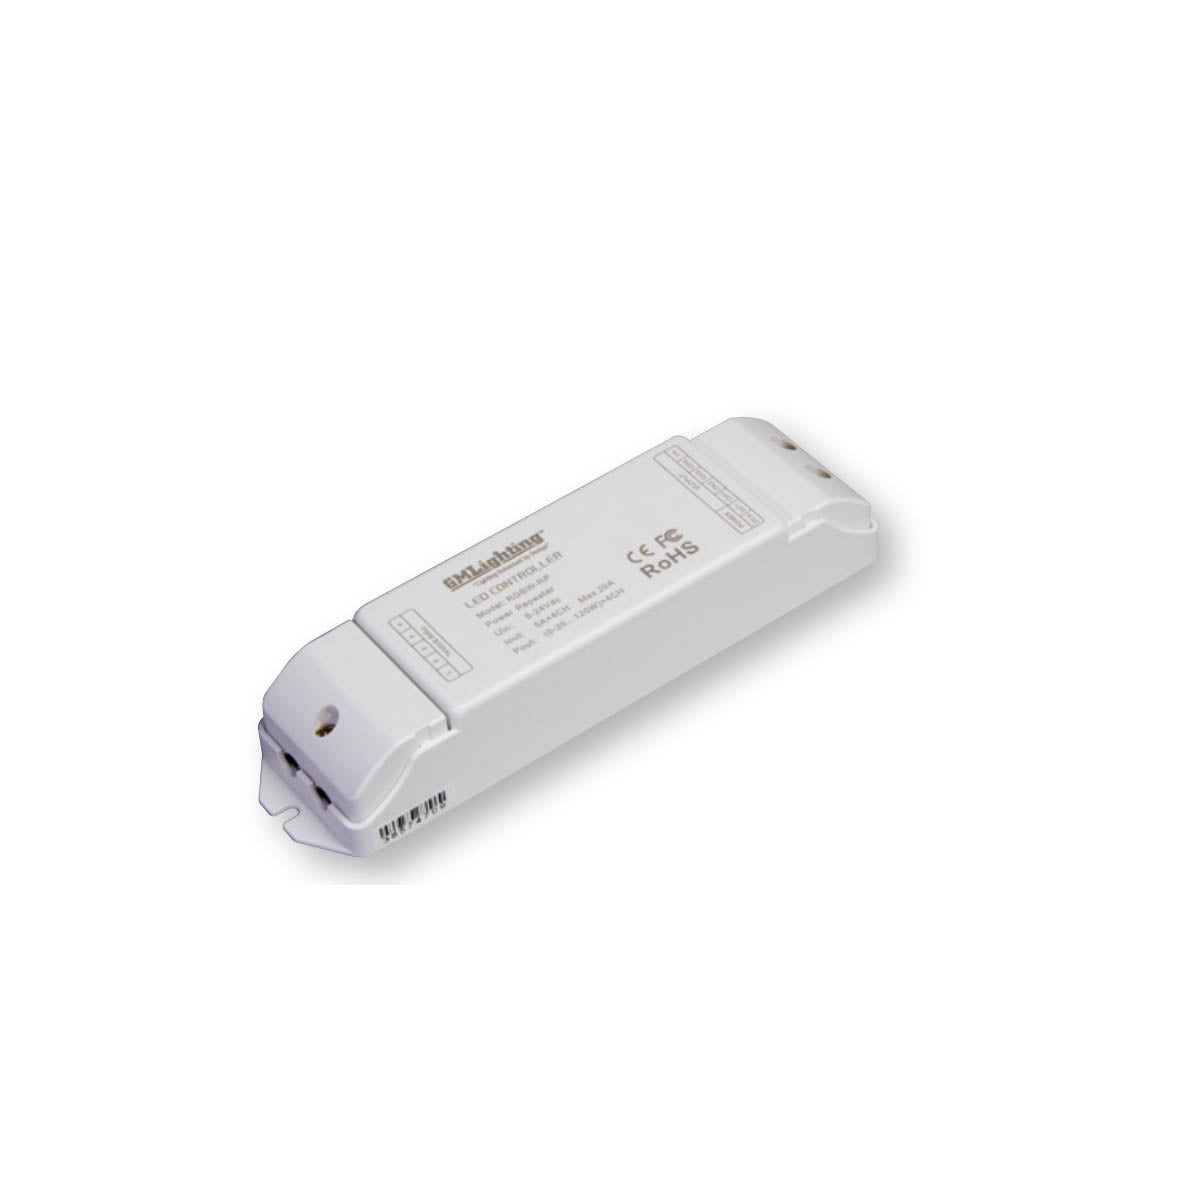 RGBW LED Repeater For LTR RGBW Strip Lights, 4 Channels